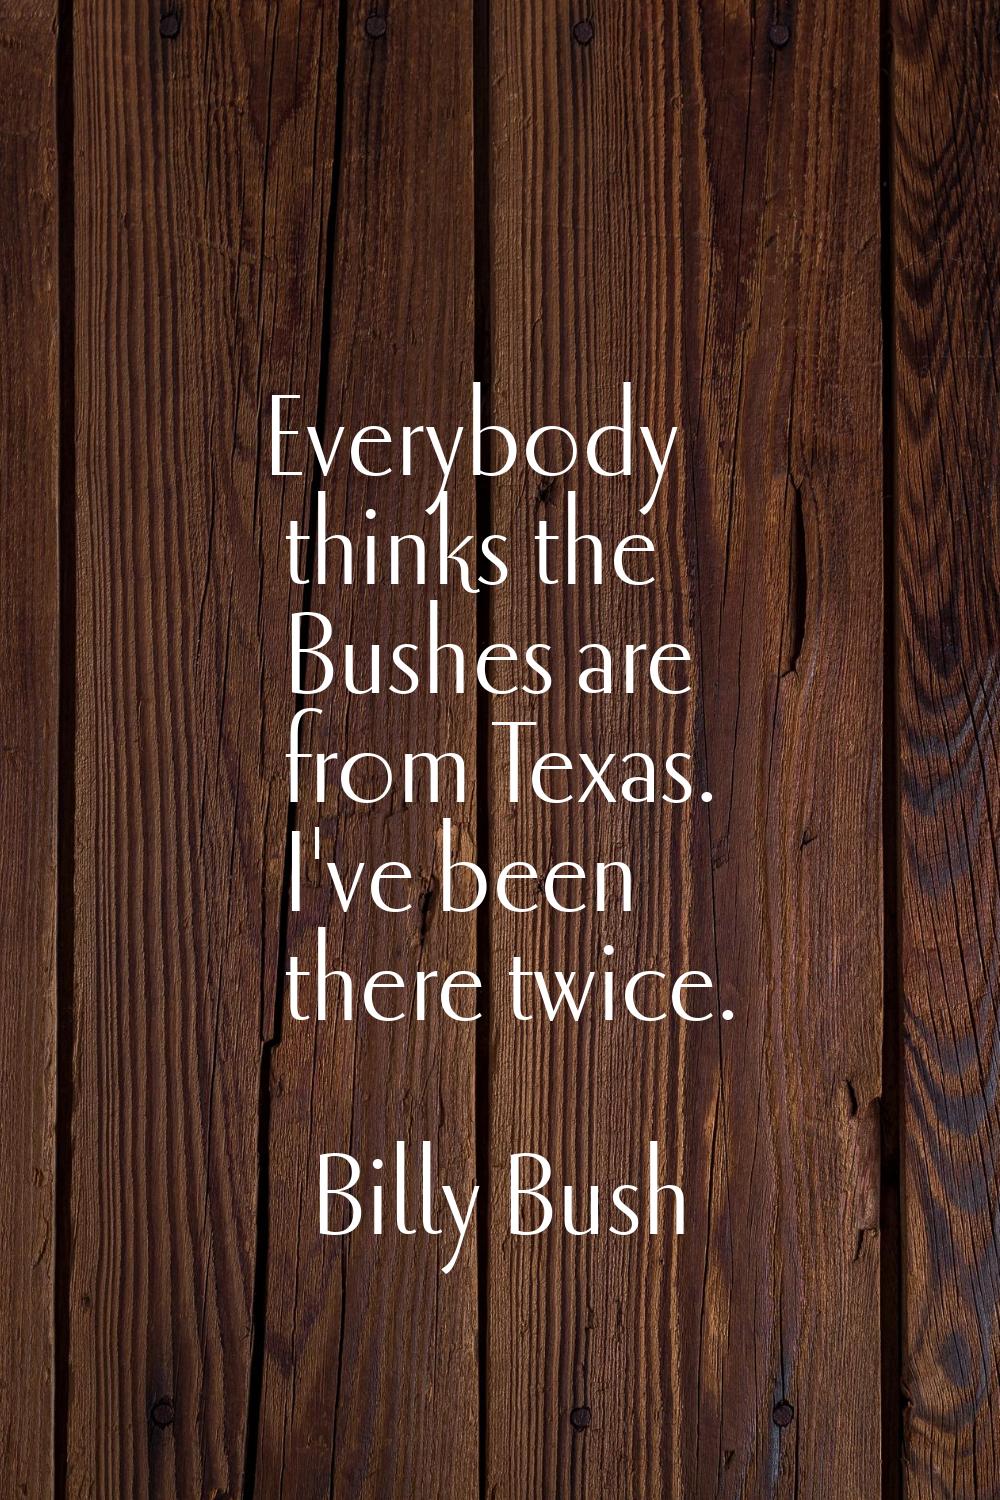 Everybody thinks the Bushes are from Texas. I've been there twice.